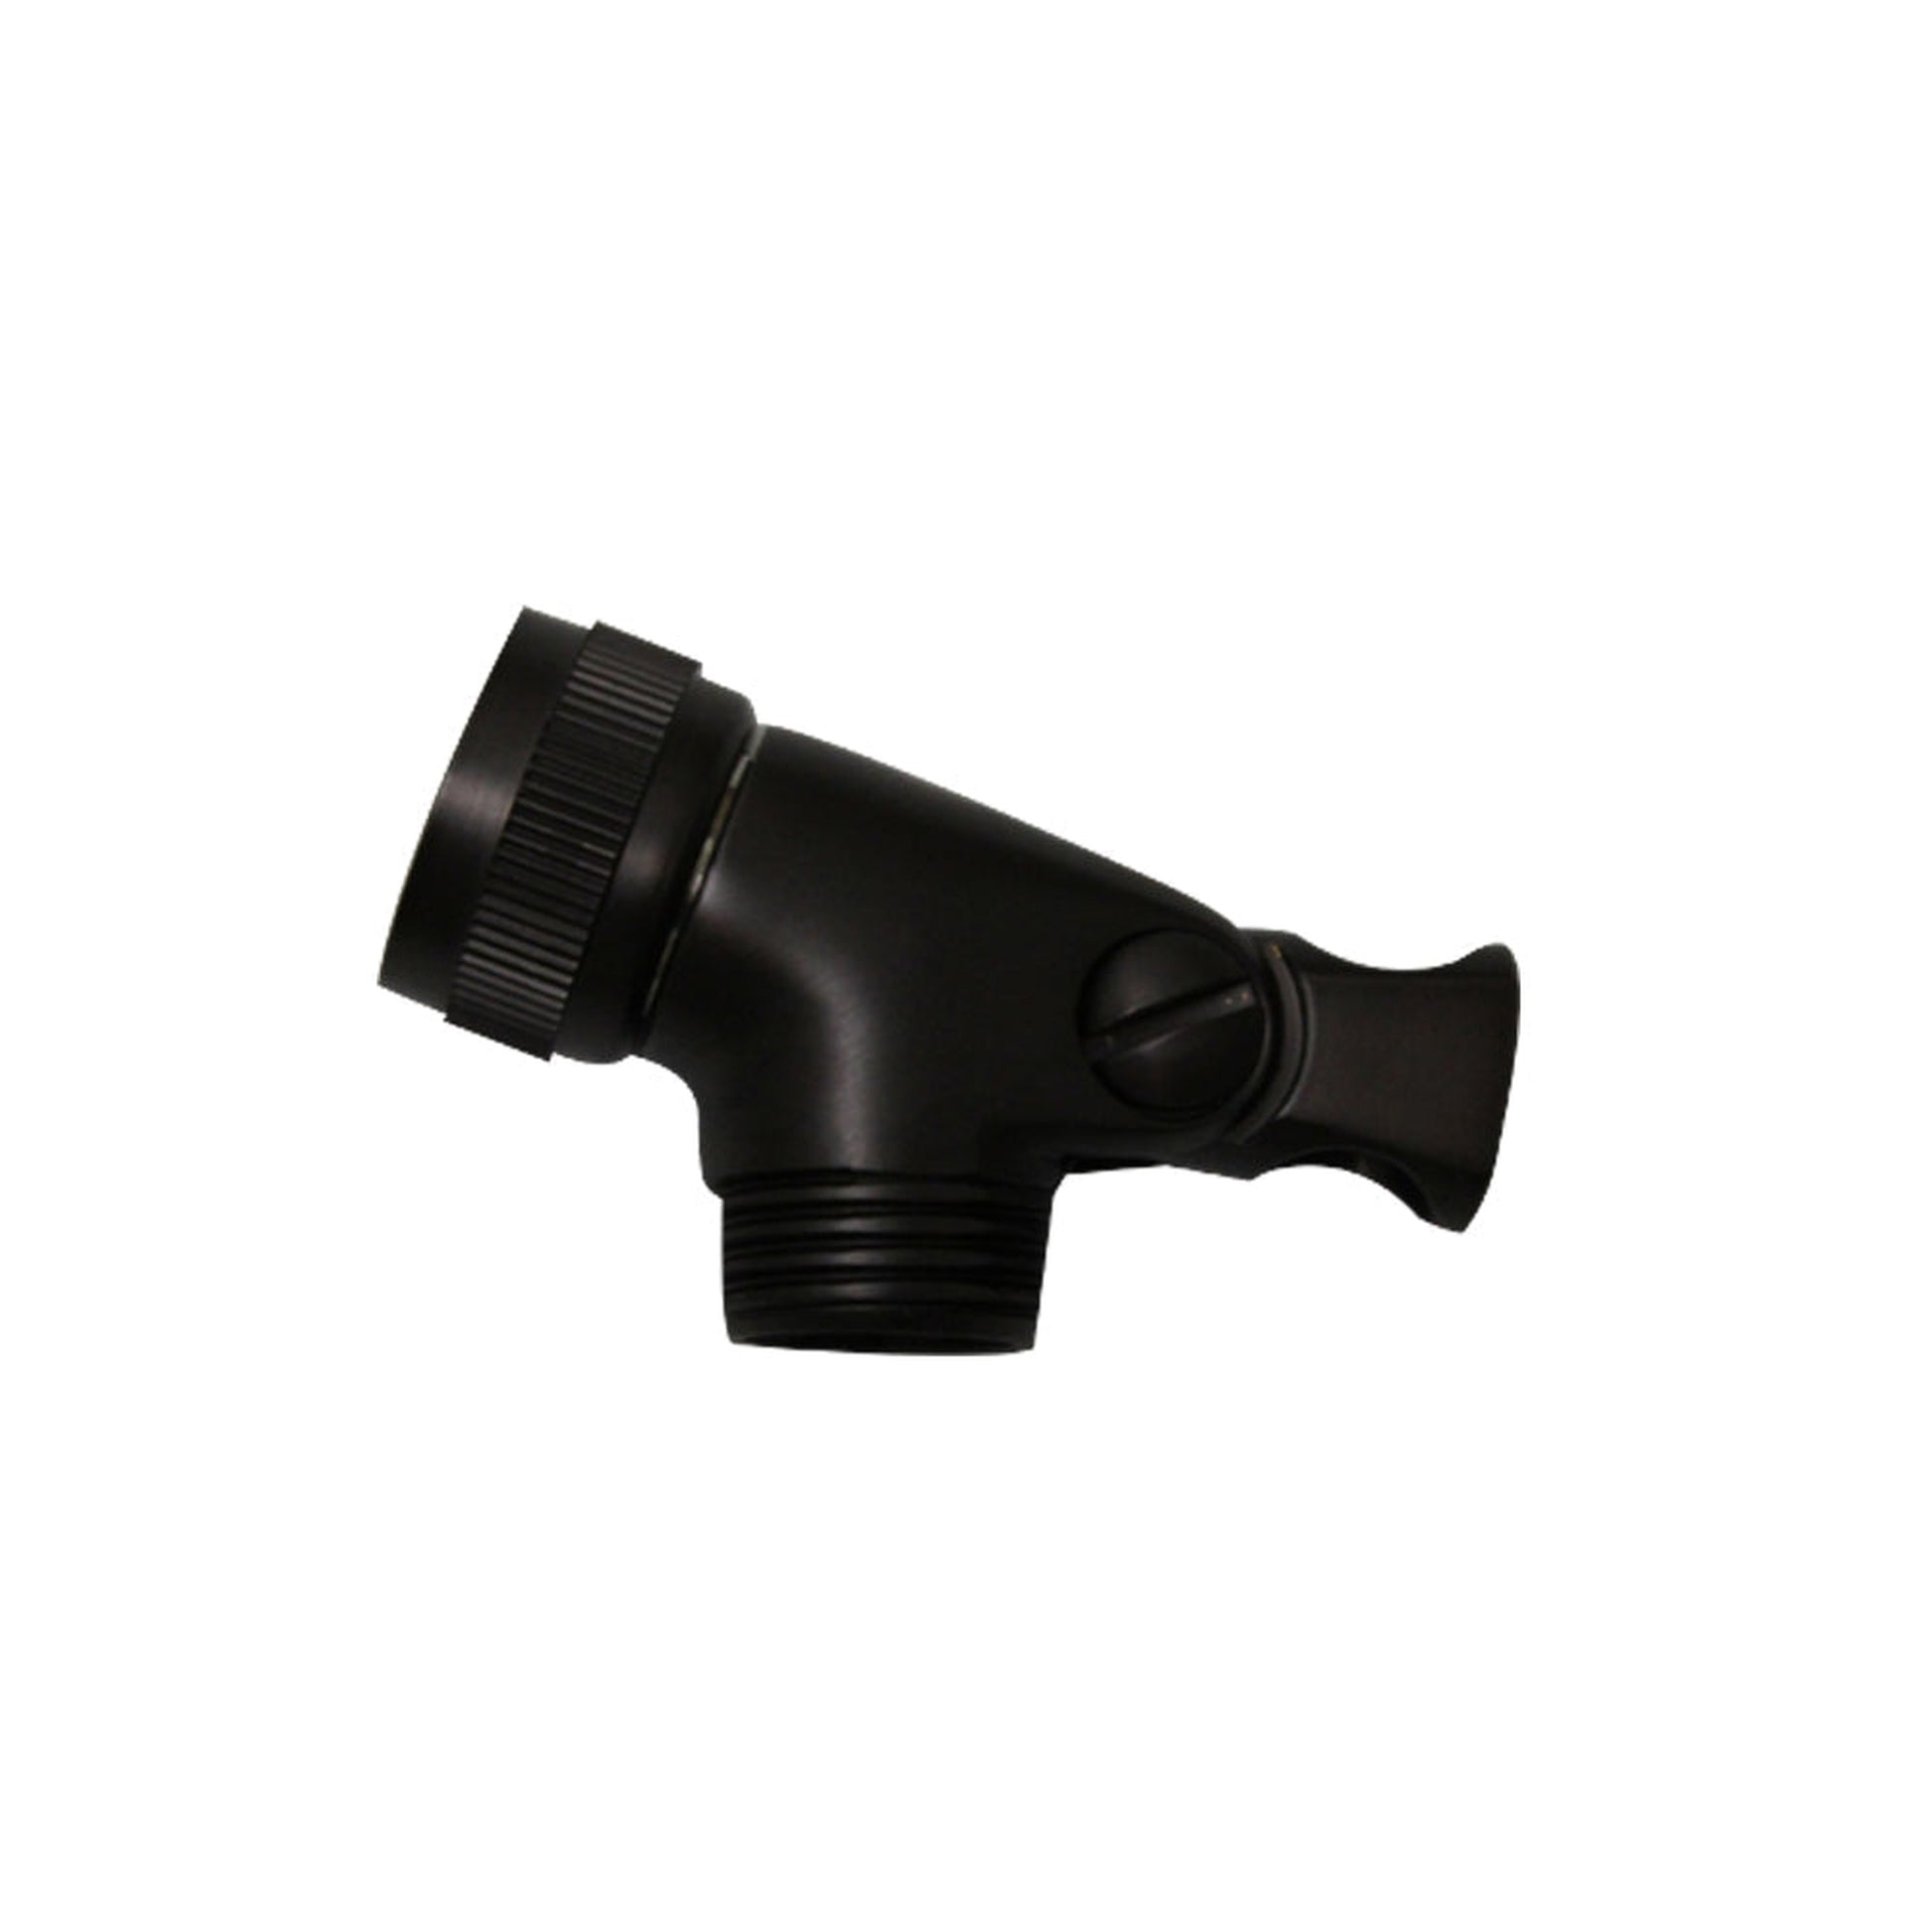 Whitehaus Showerhaus WH172A5-ORB Oil Rubbed Bronze Brass Swivel Hand Spray Connector